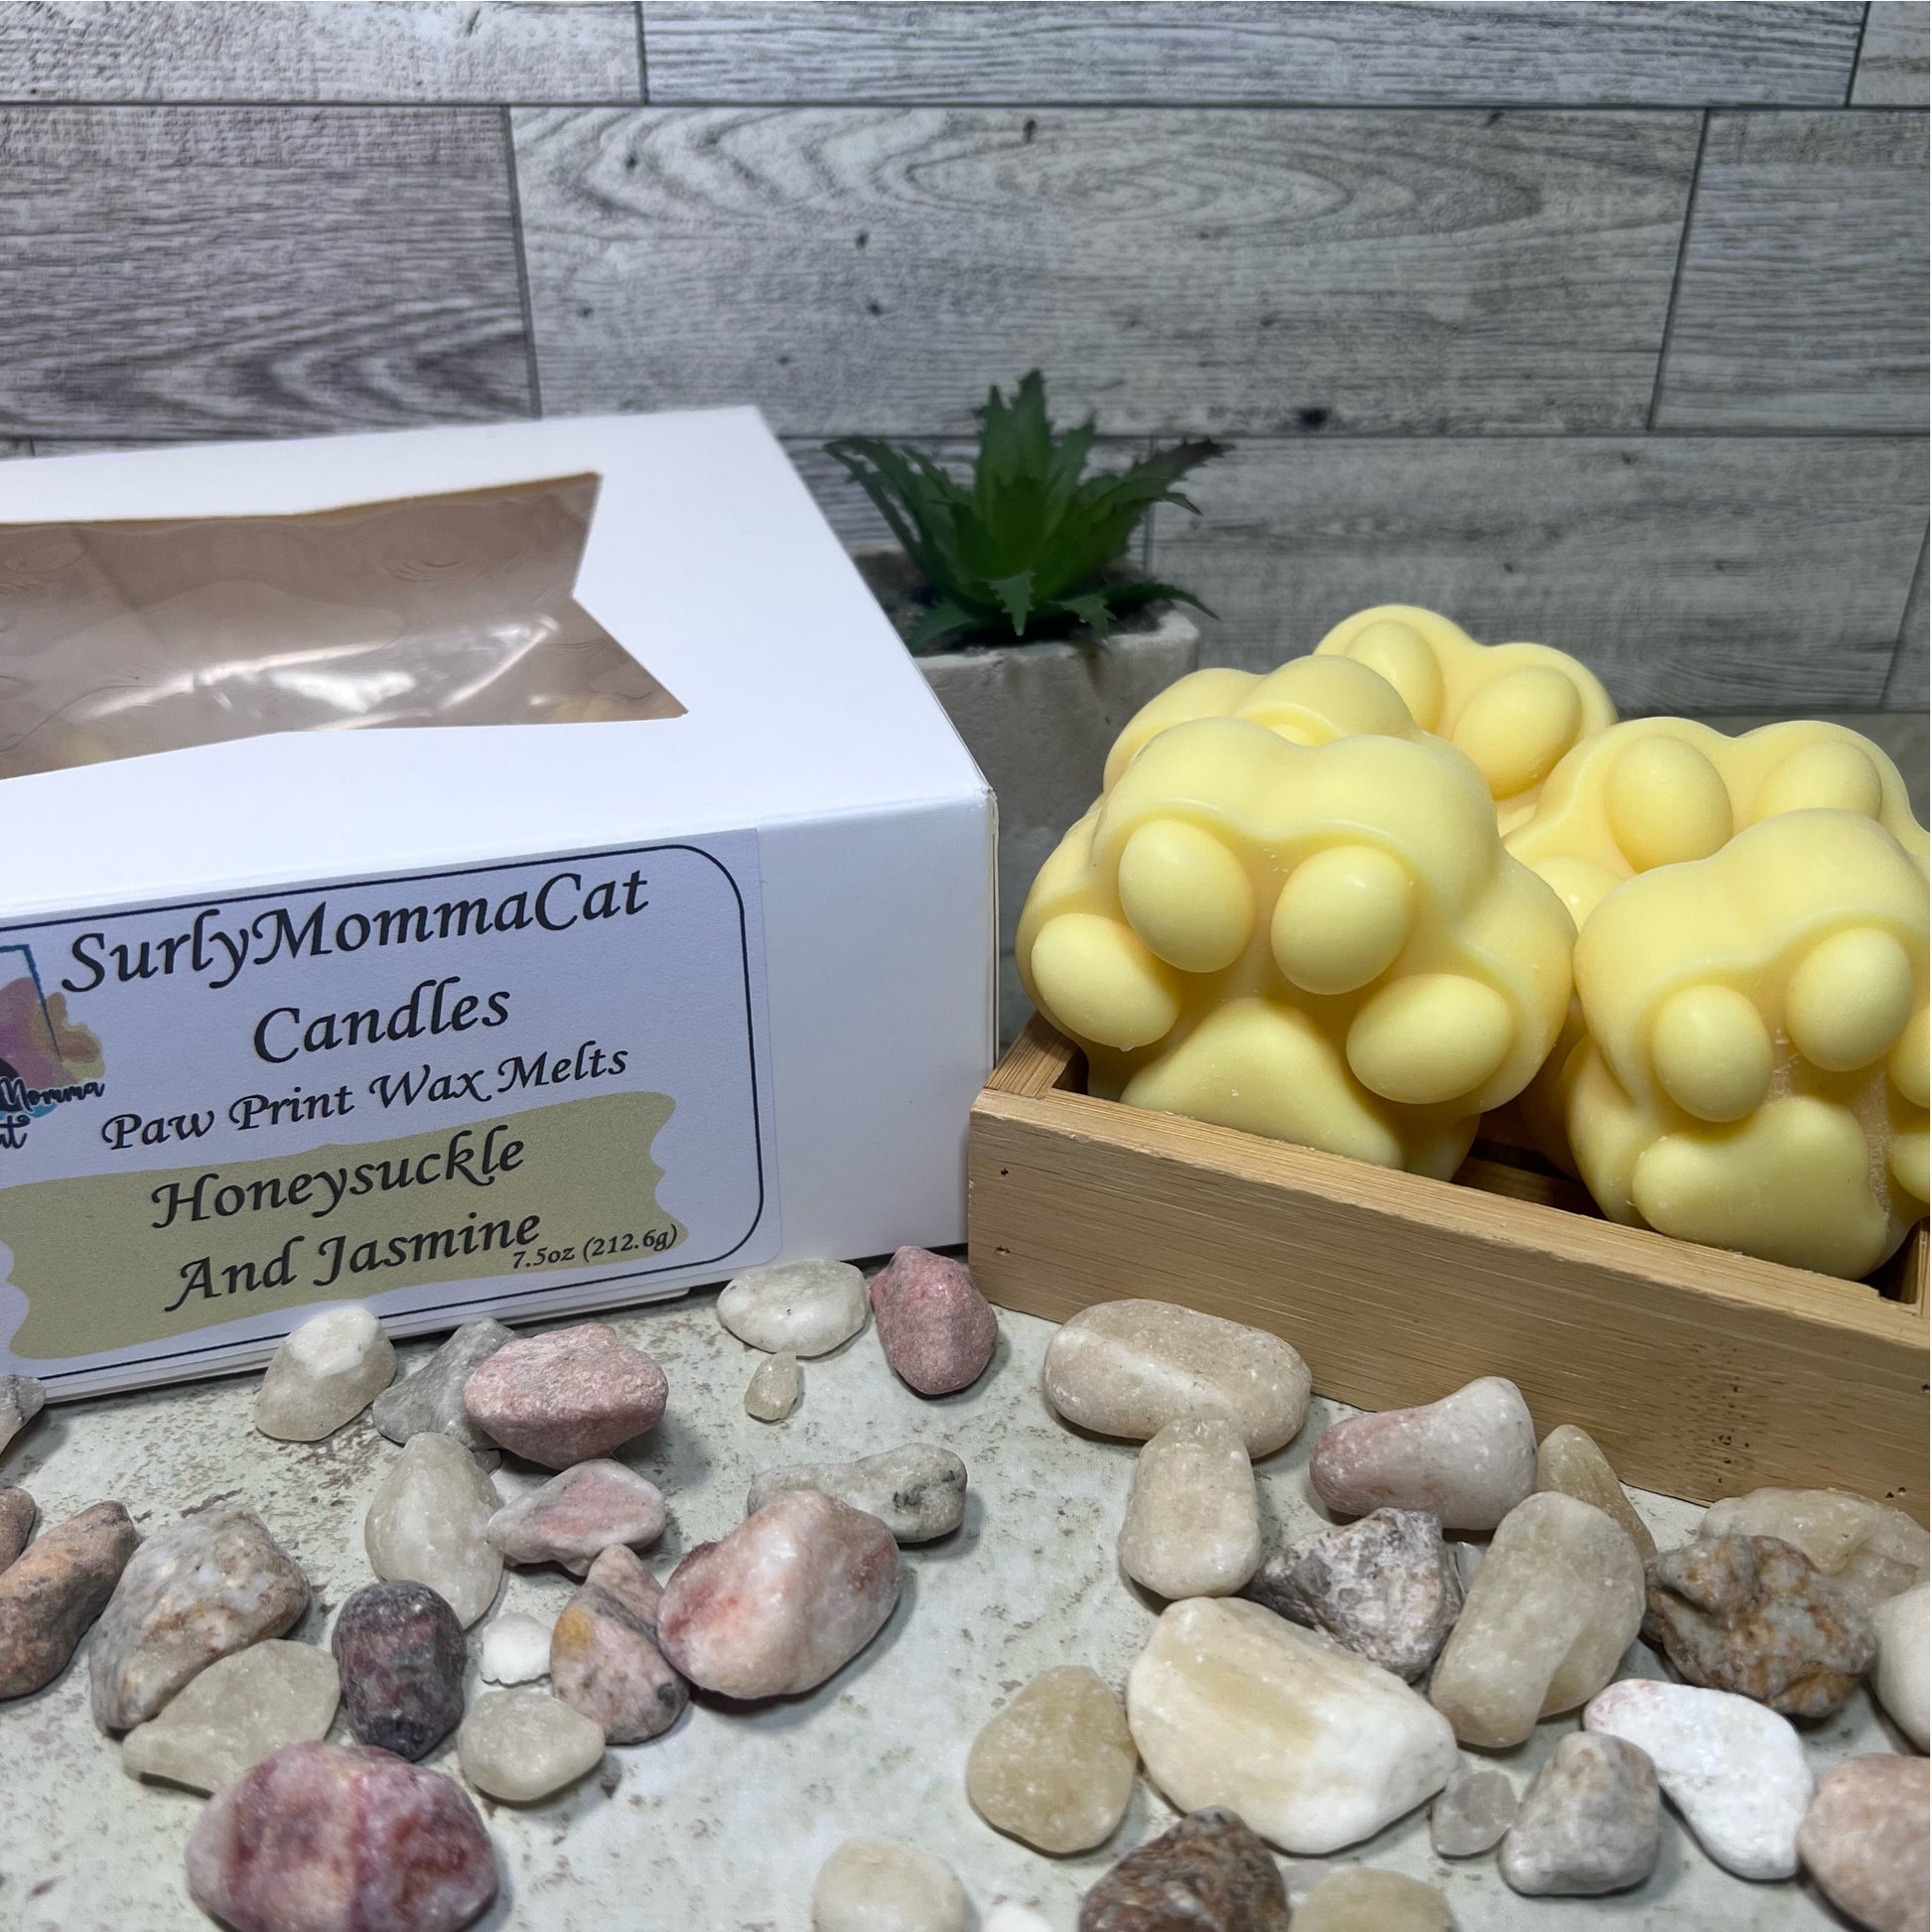 Yellow Honeysuckle and Jasmine soy wax melt paw prints, in rustic box, with white box labeled Honeysuckle and Jasmine, with decorative rocks and plants.